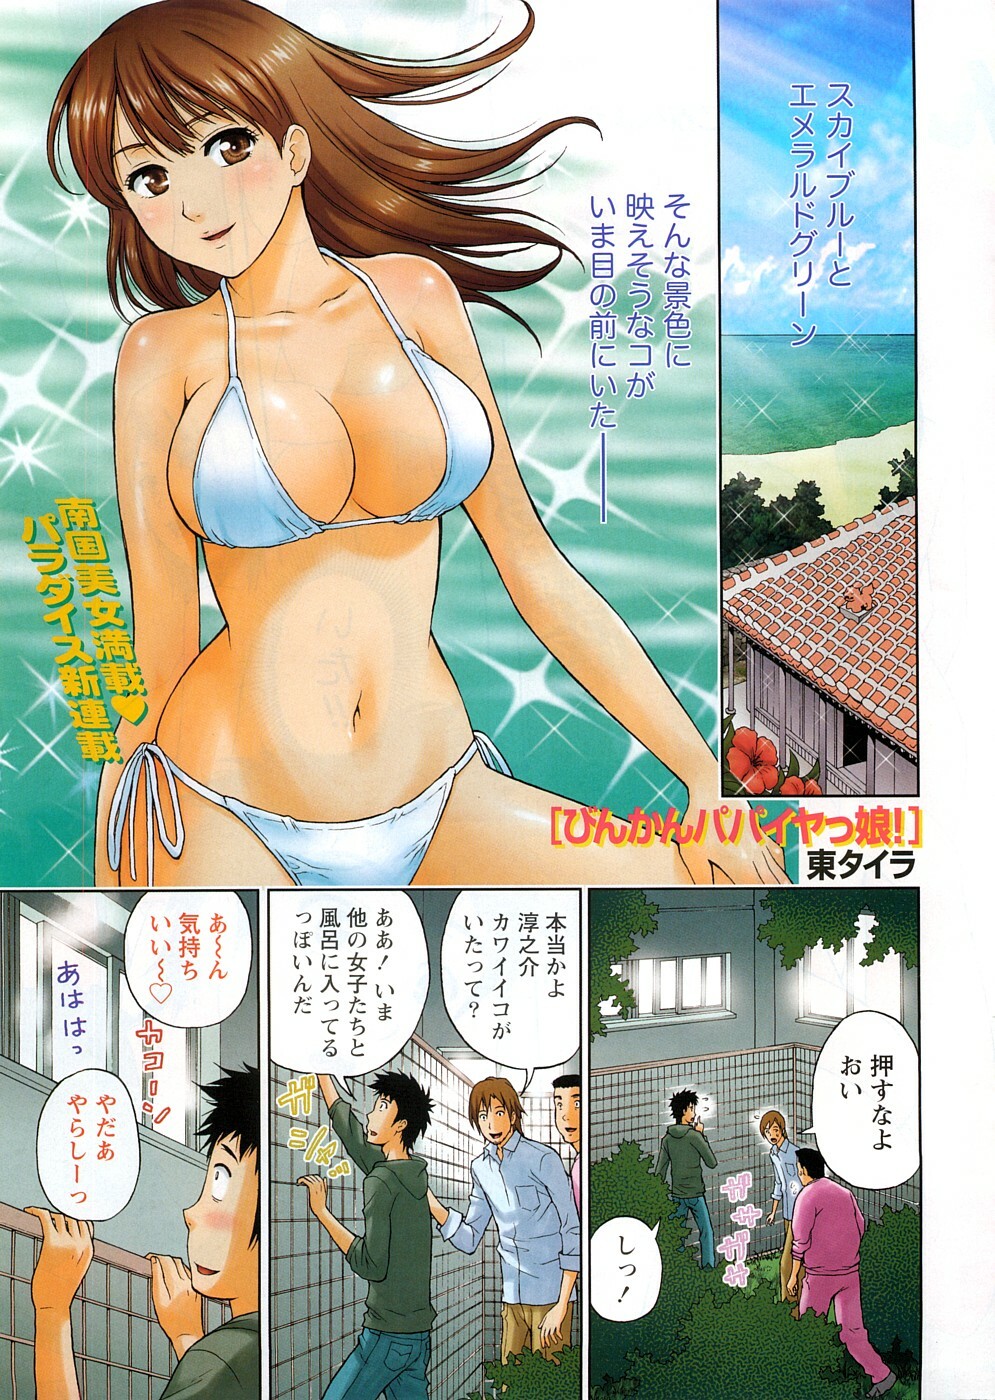 Monthly Vitaman 2009-02 [Incomplete] page 2 full